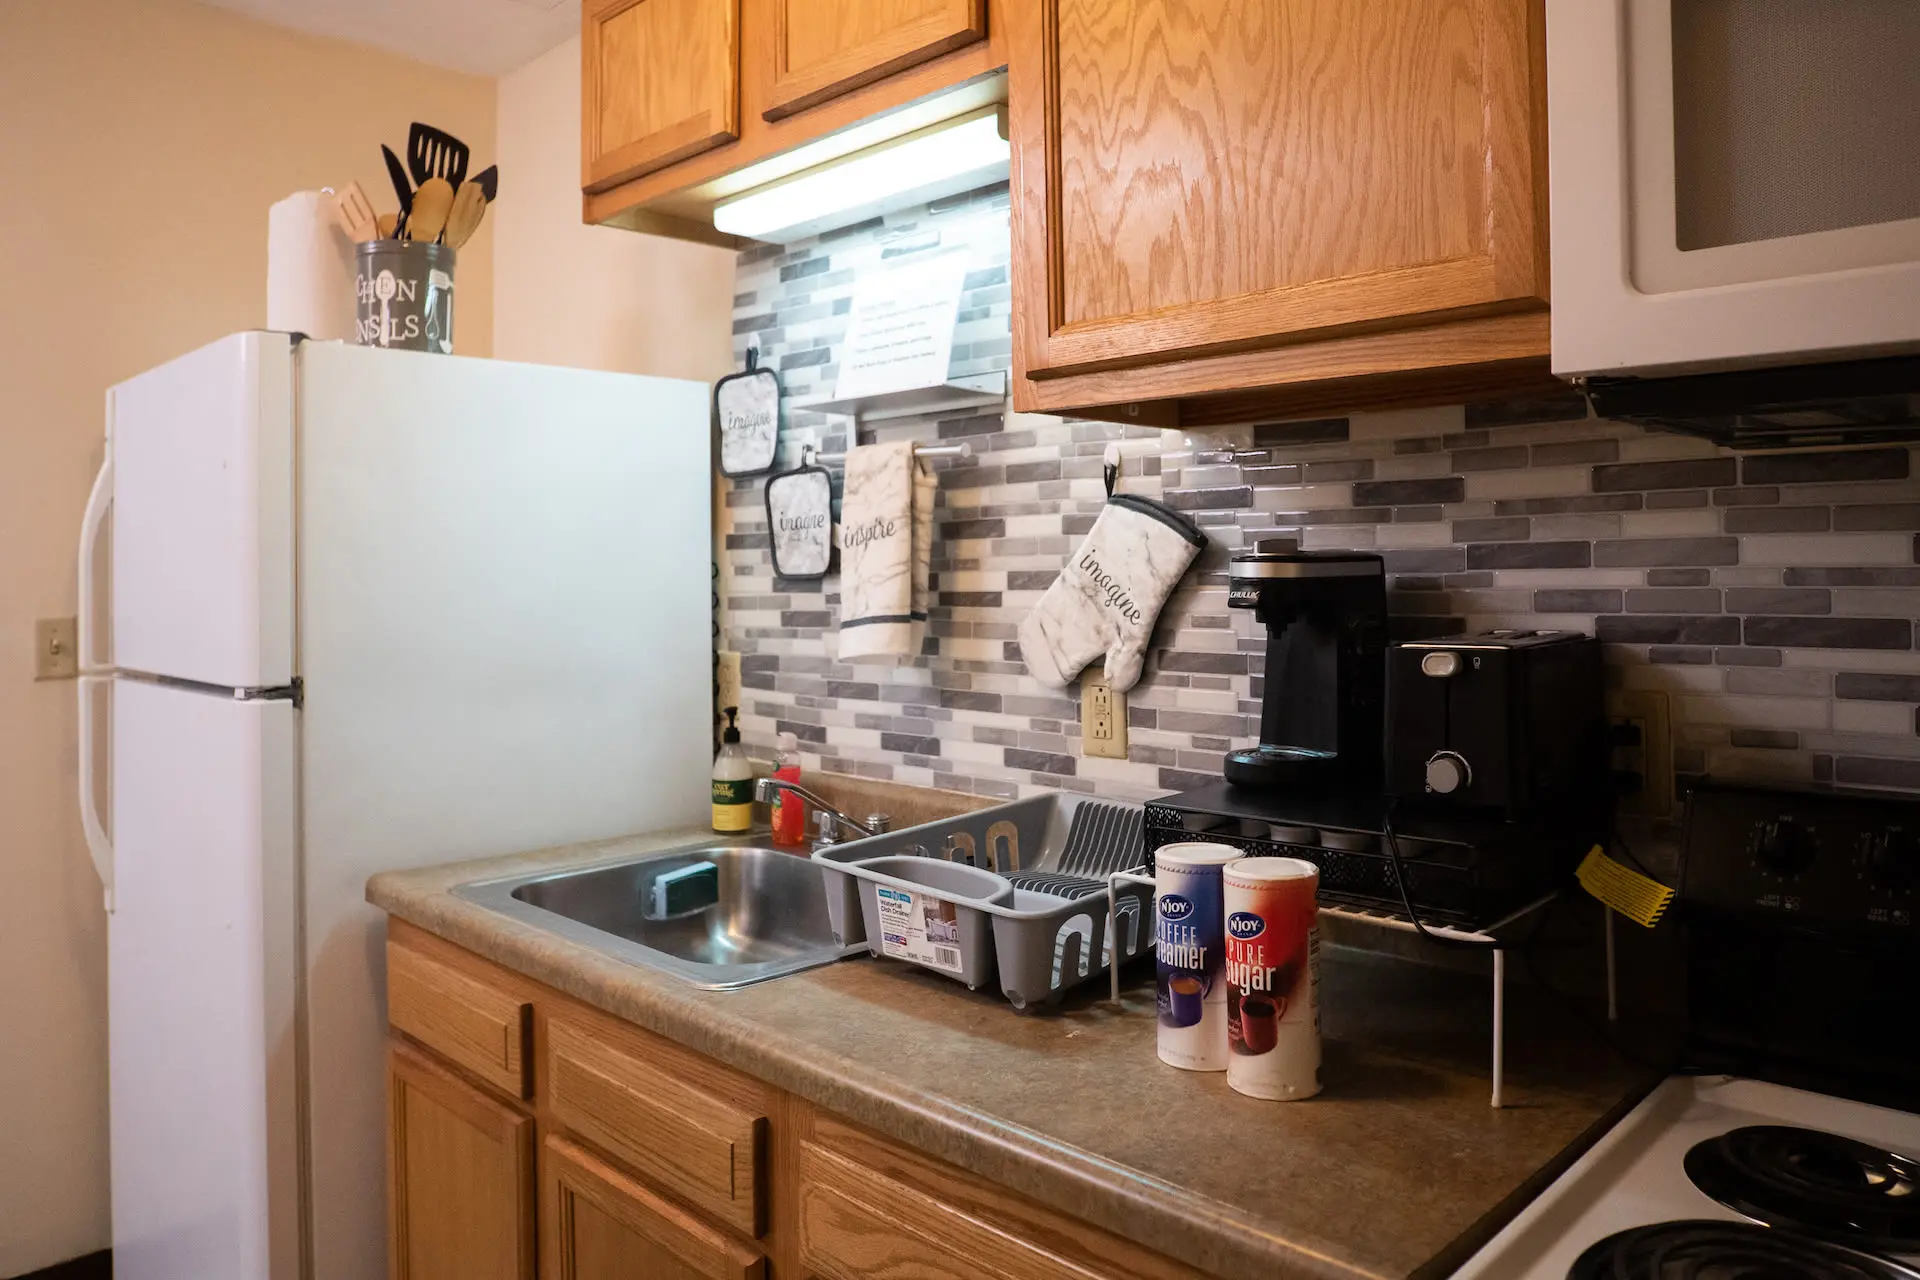 2 Bedroom Downtown Apt|Clean and Safe|